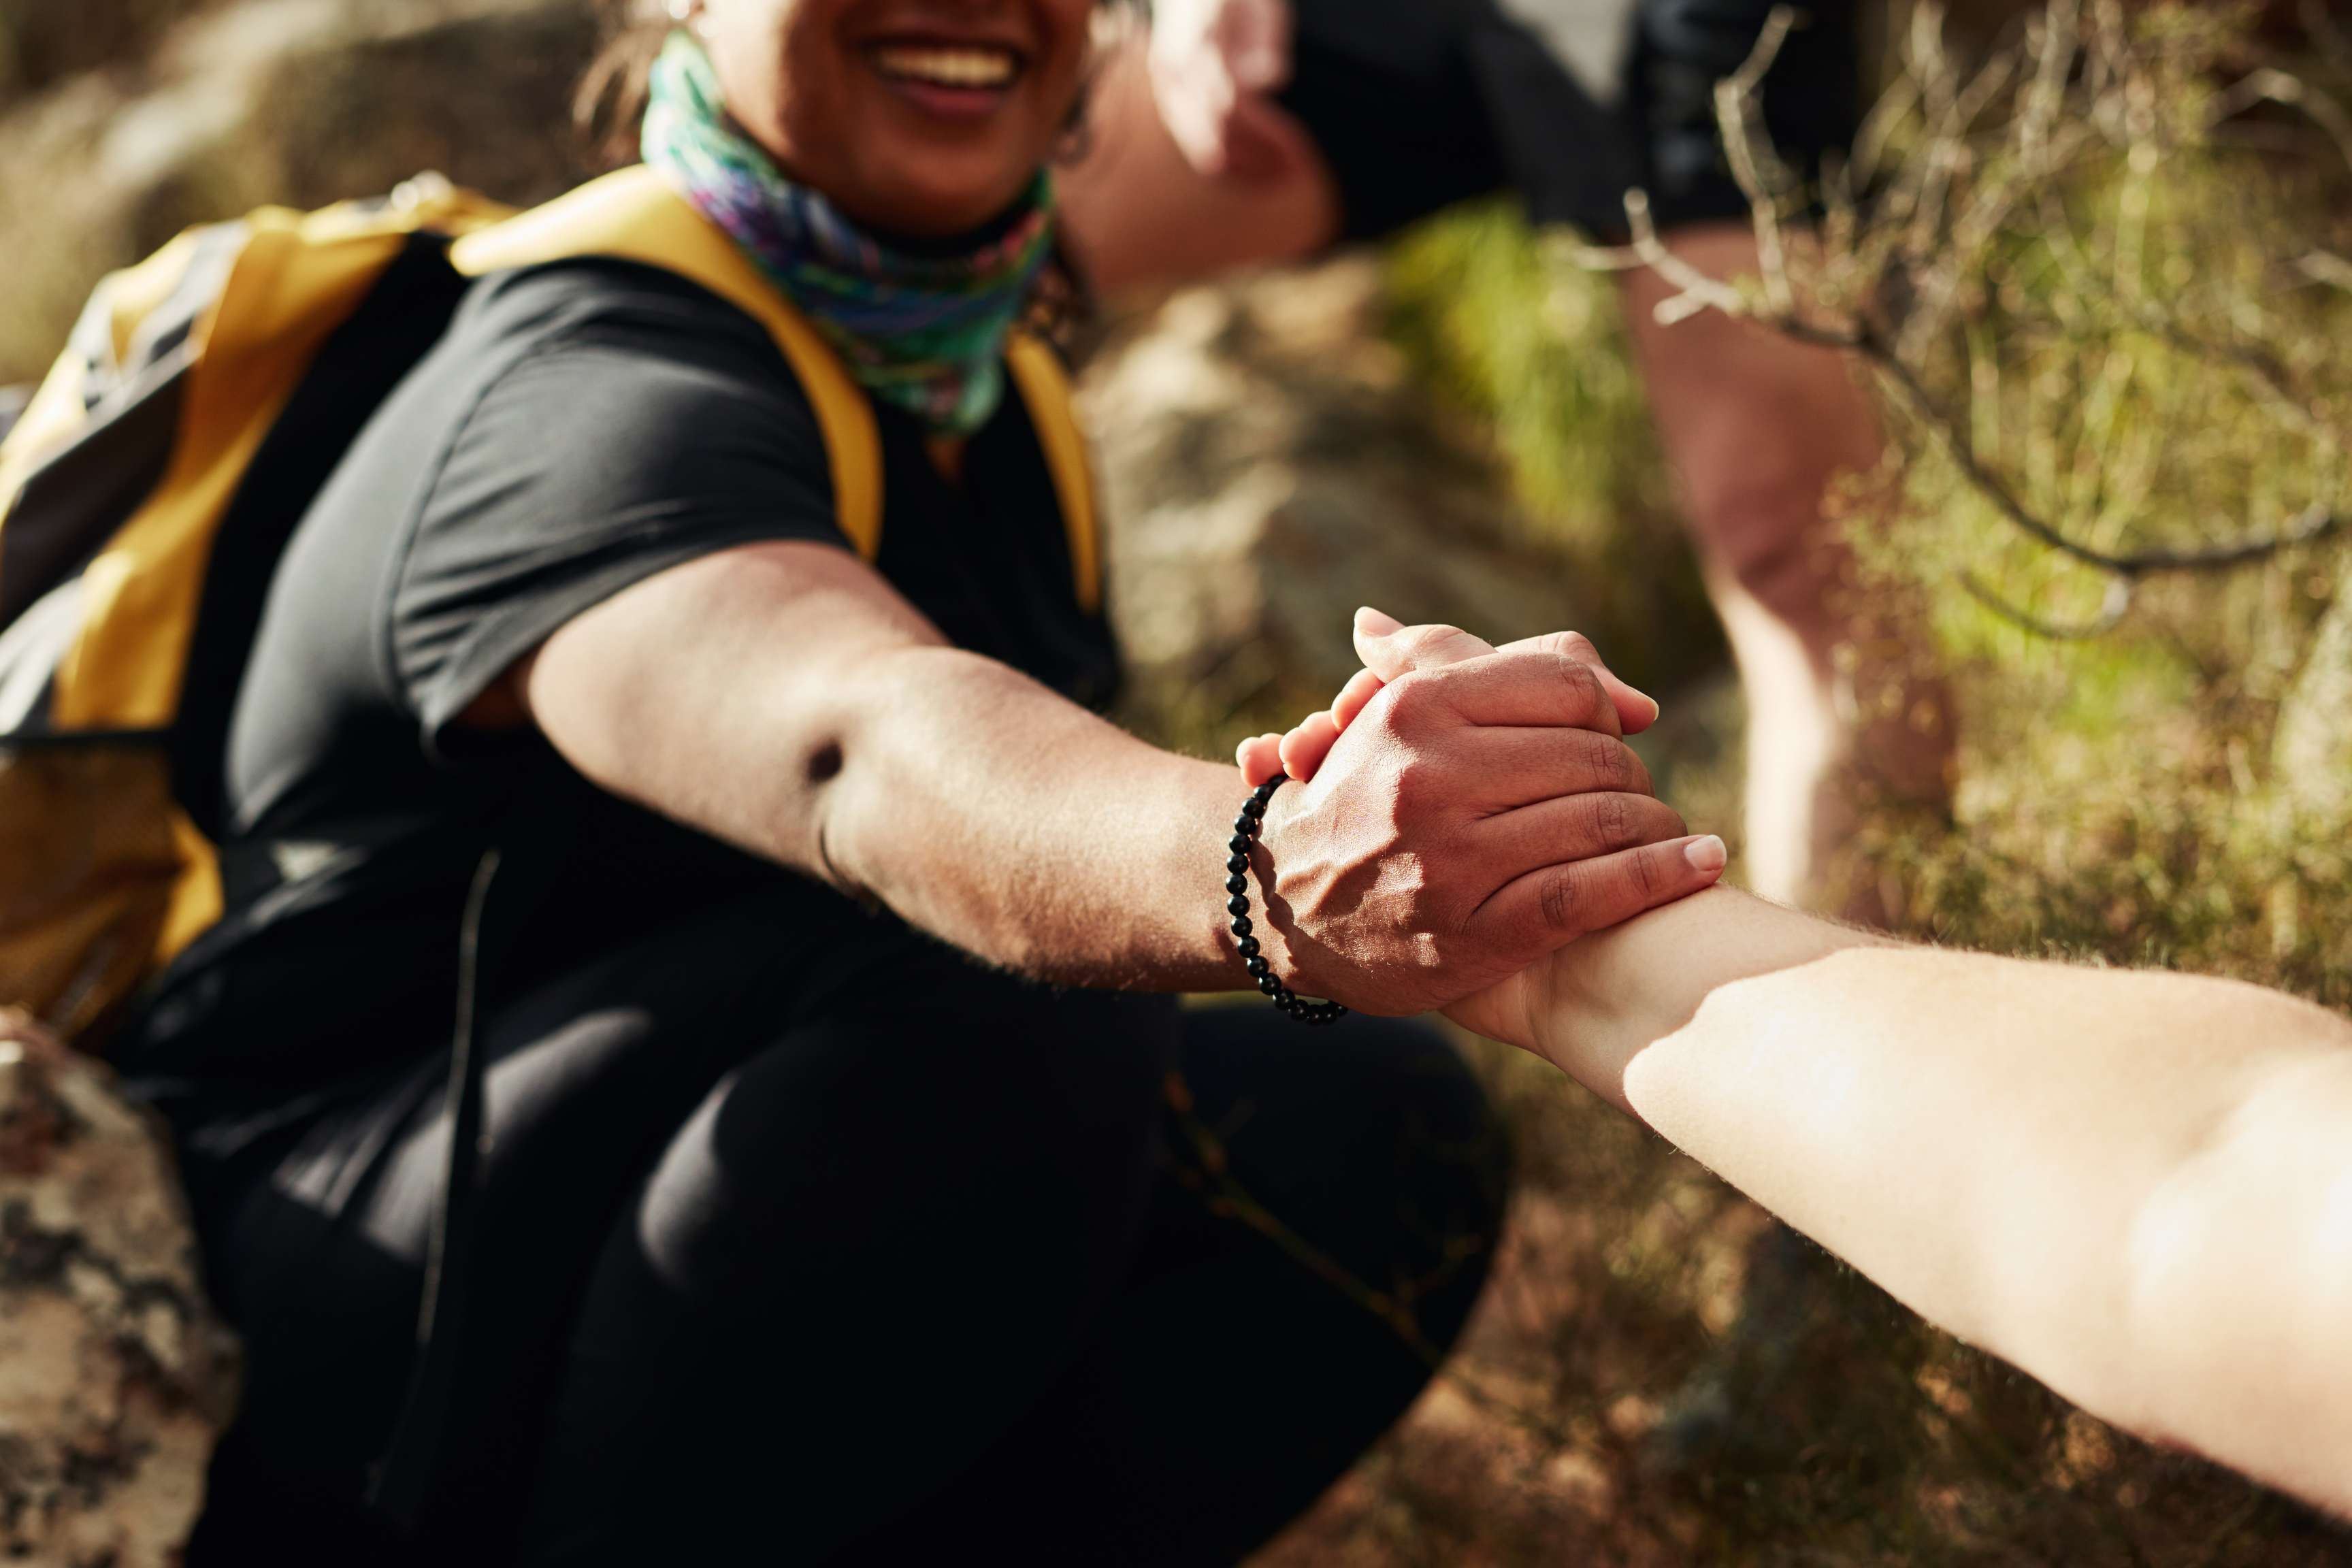 One person grabs a woman by the hand to support her on a walk, the hands are in the foreground.